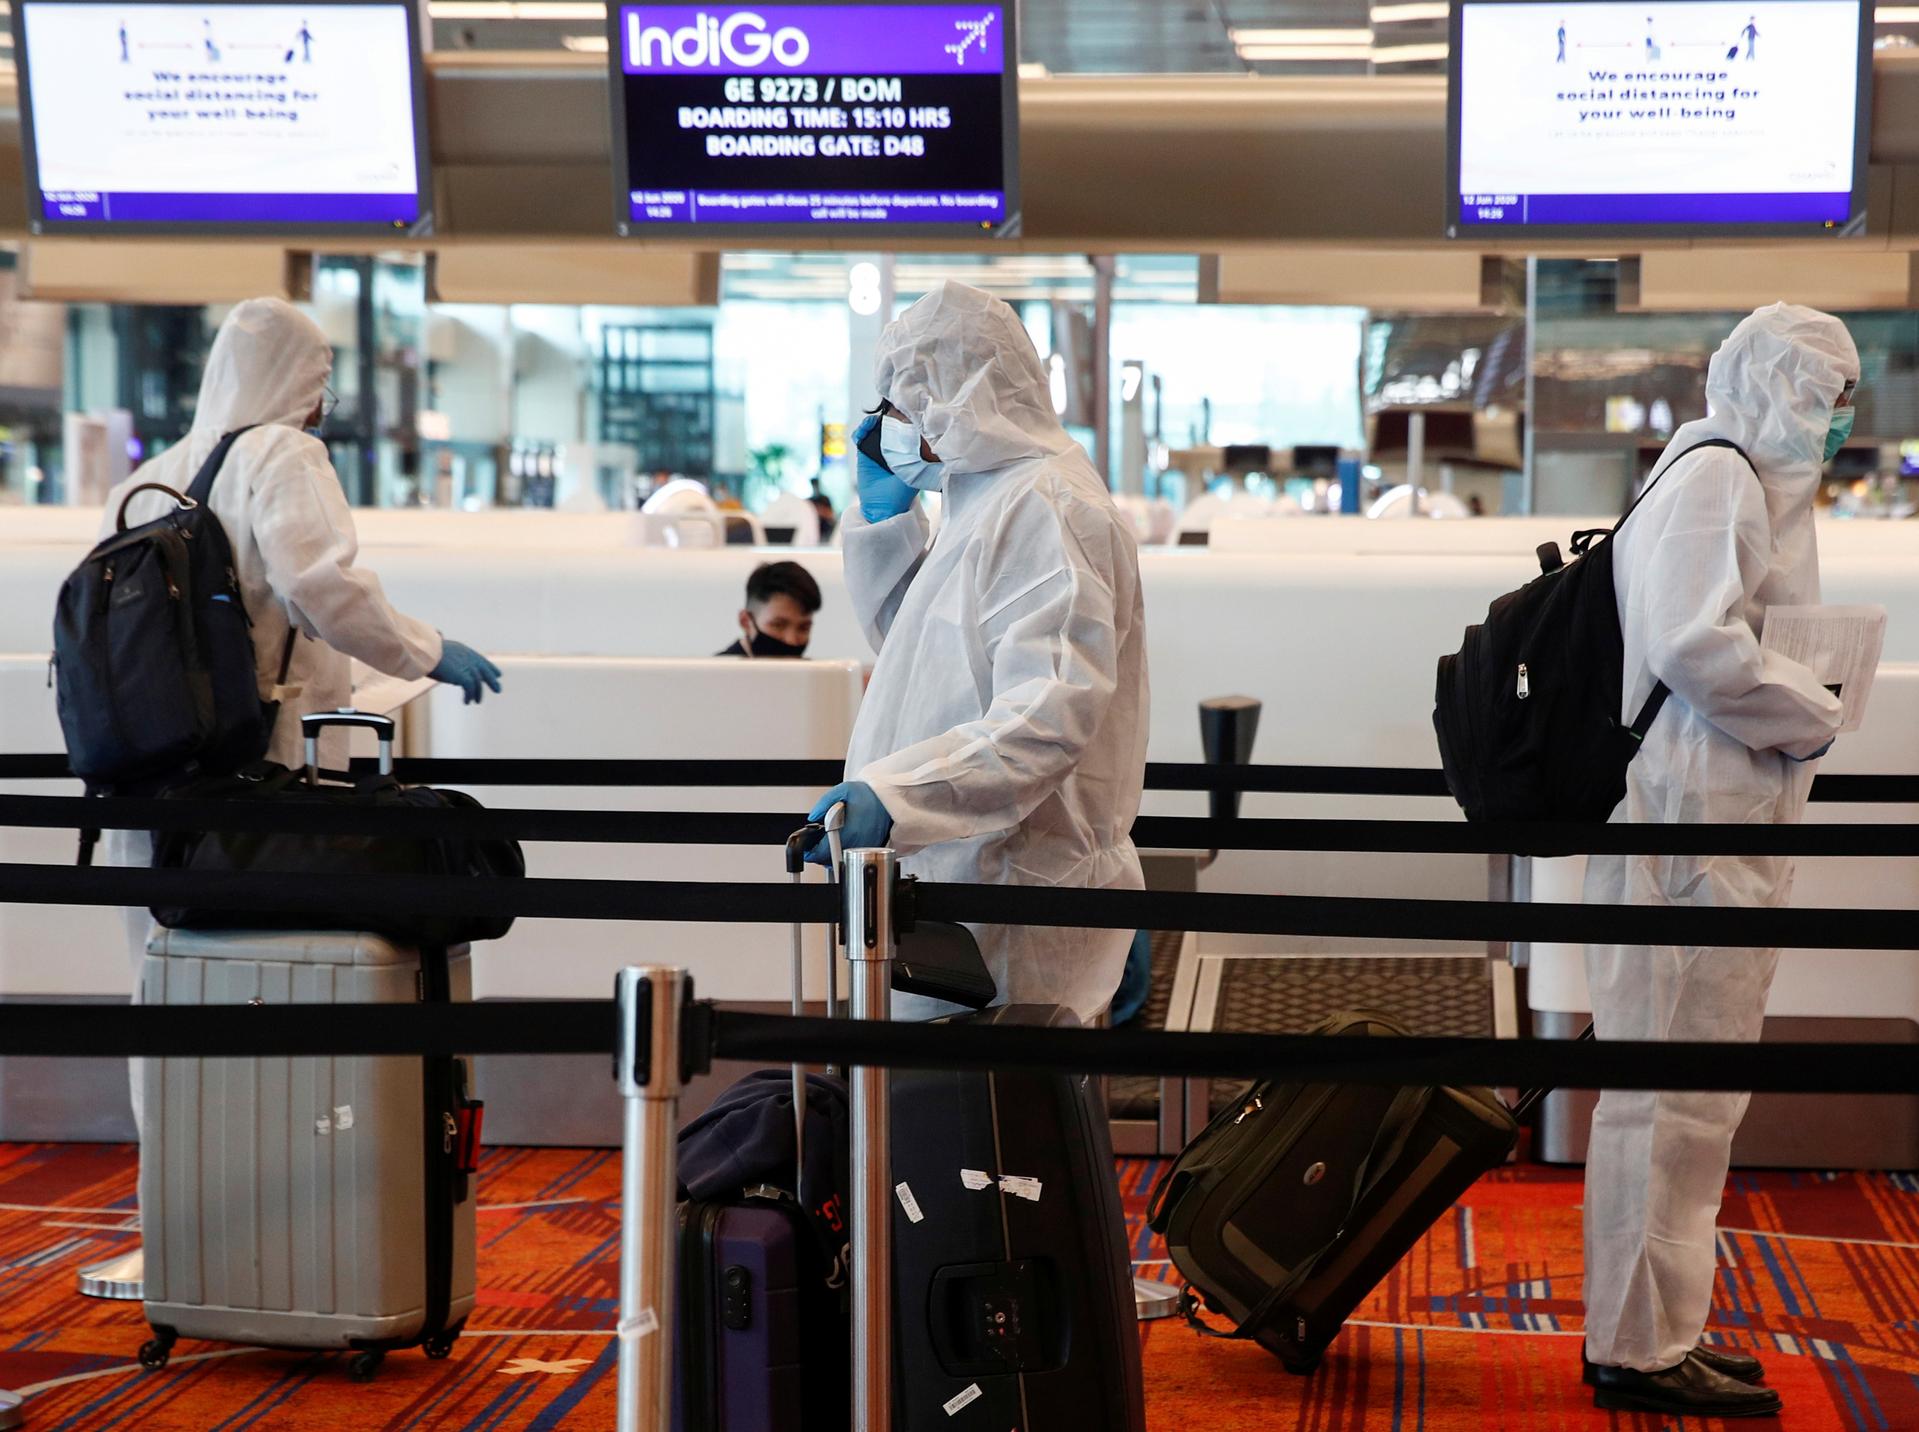 Singapore to make travellers wear electronic tags to enforce quarantine